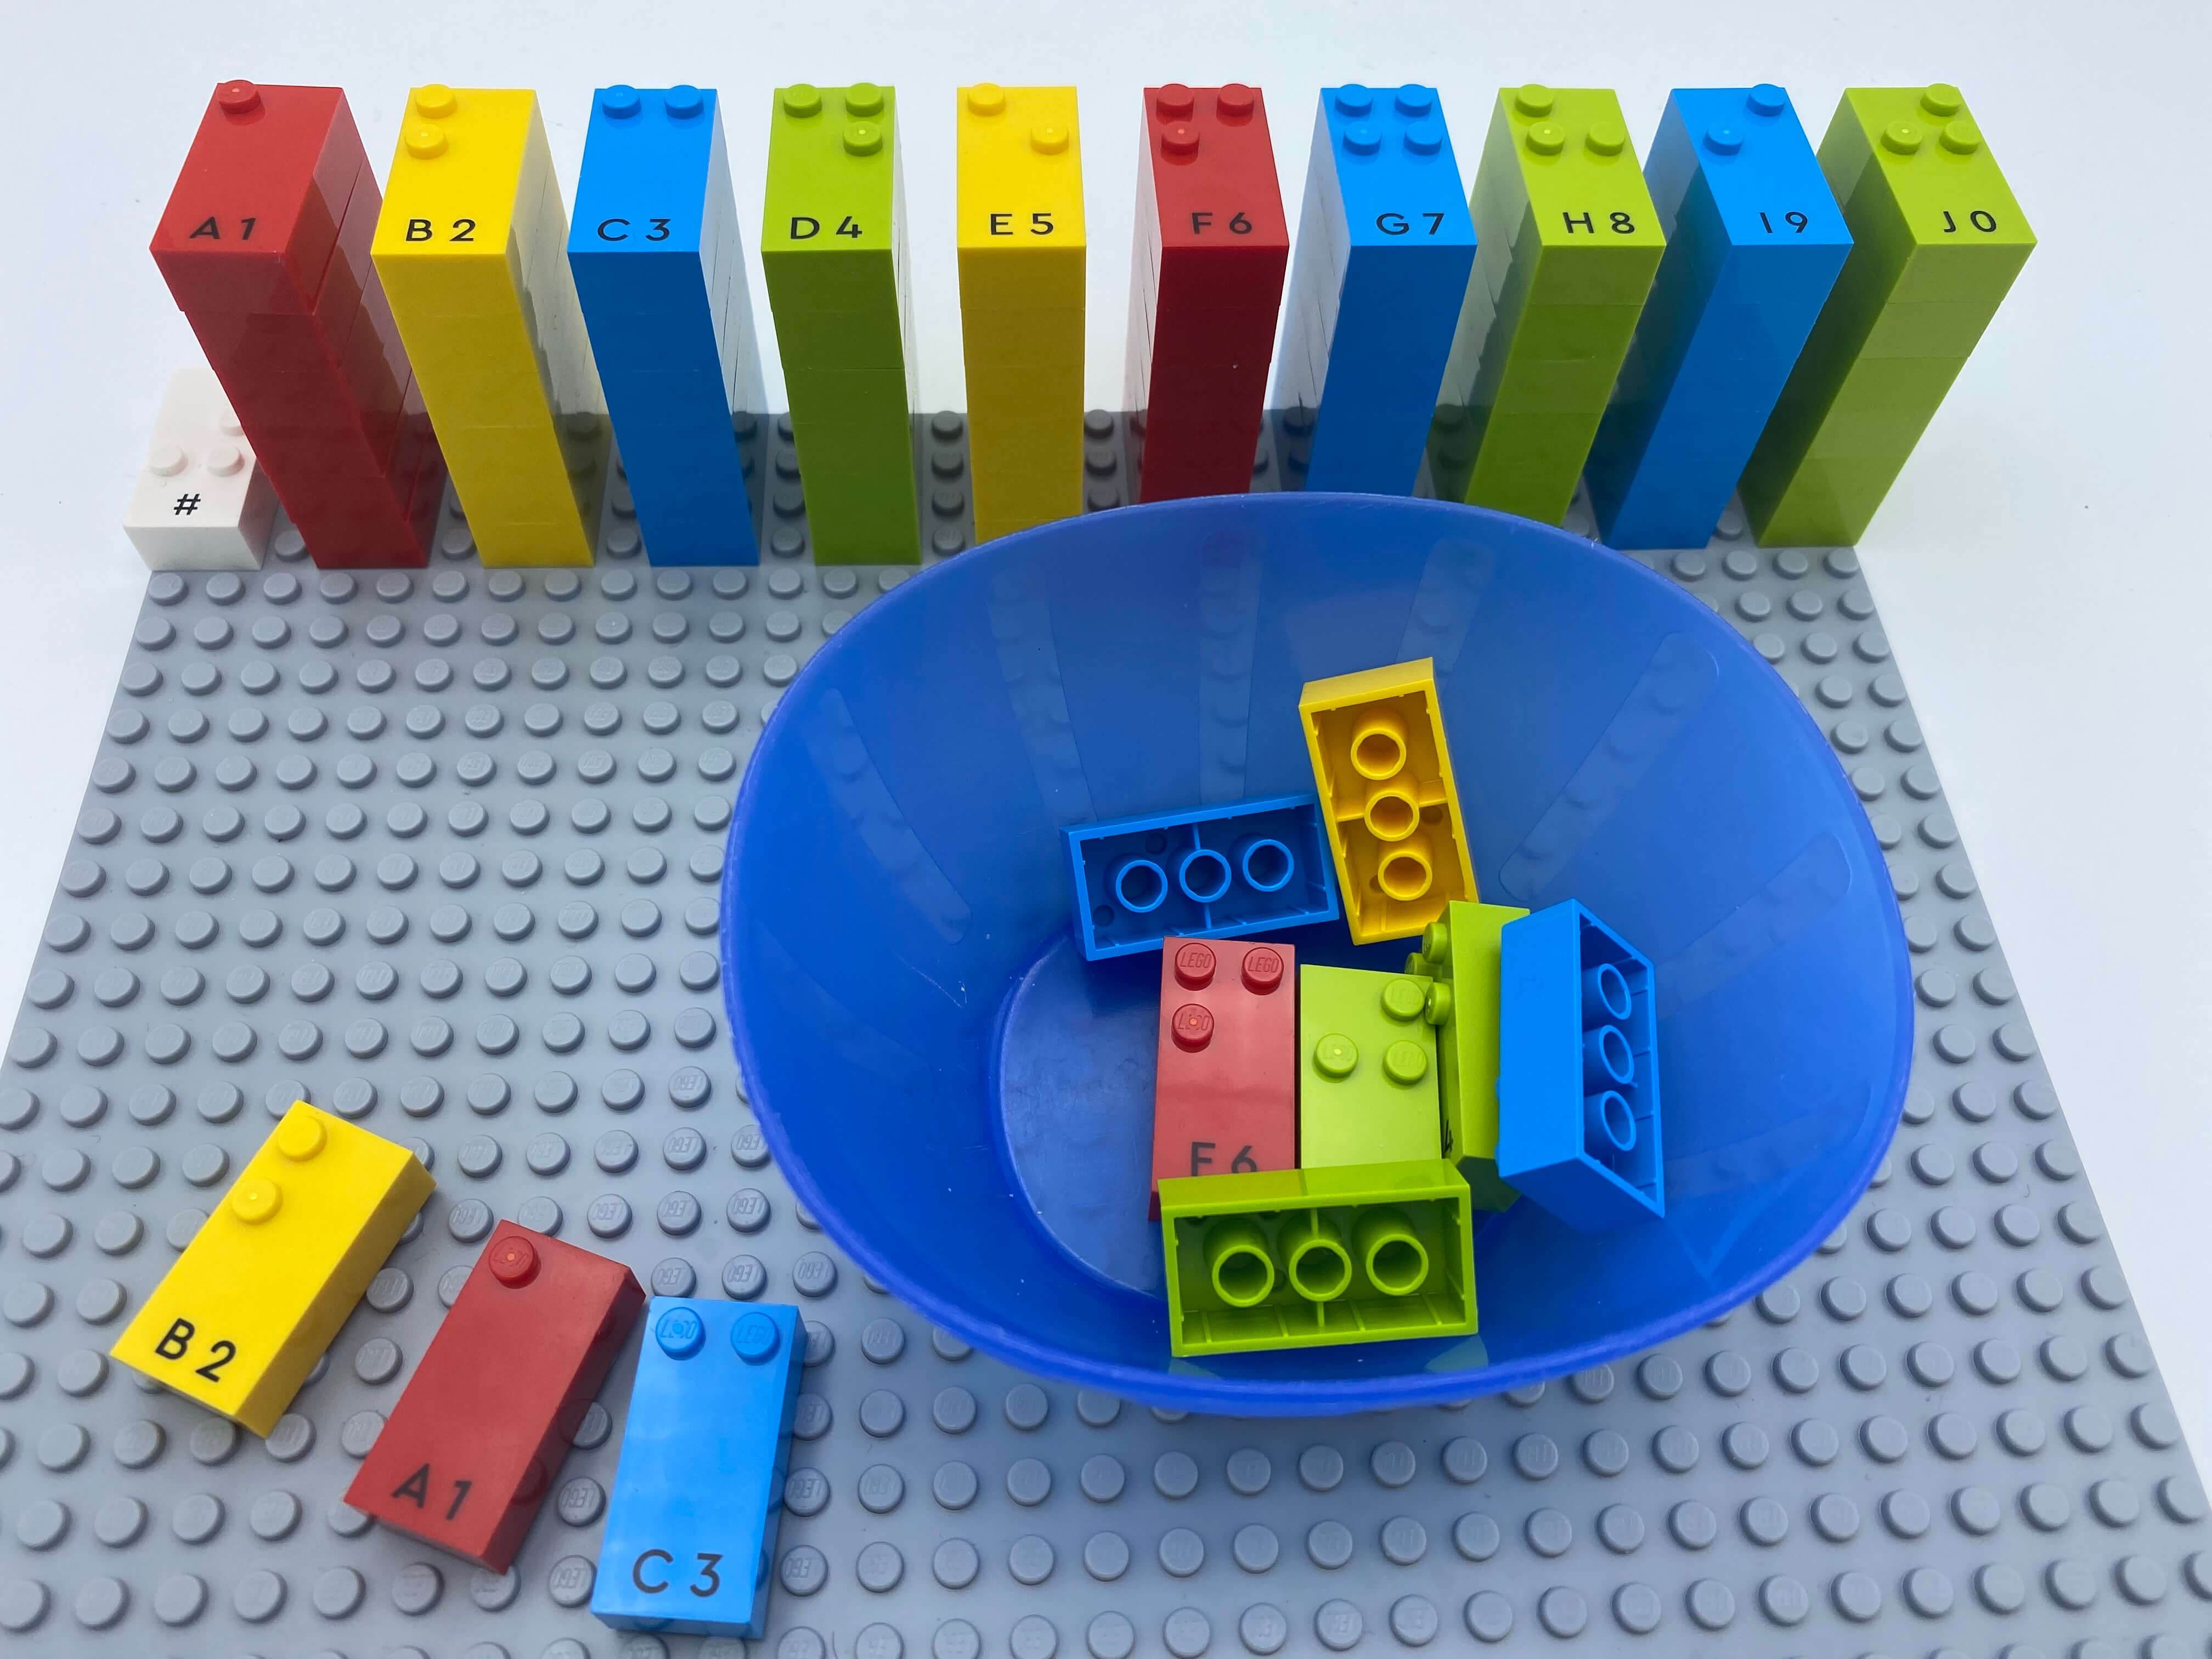 Numbers sign brick and 10 towers of number bricks aligned on the base plate. a bowl with bricks and 3 number bricks out of the bowl: 2, 1, 3.